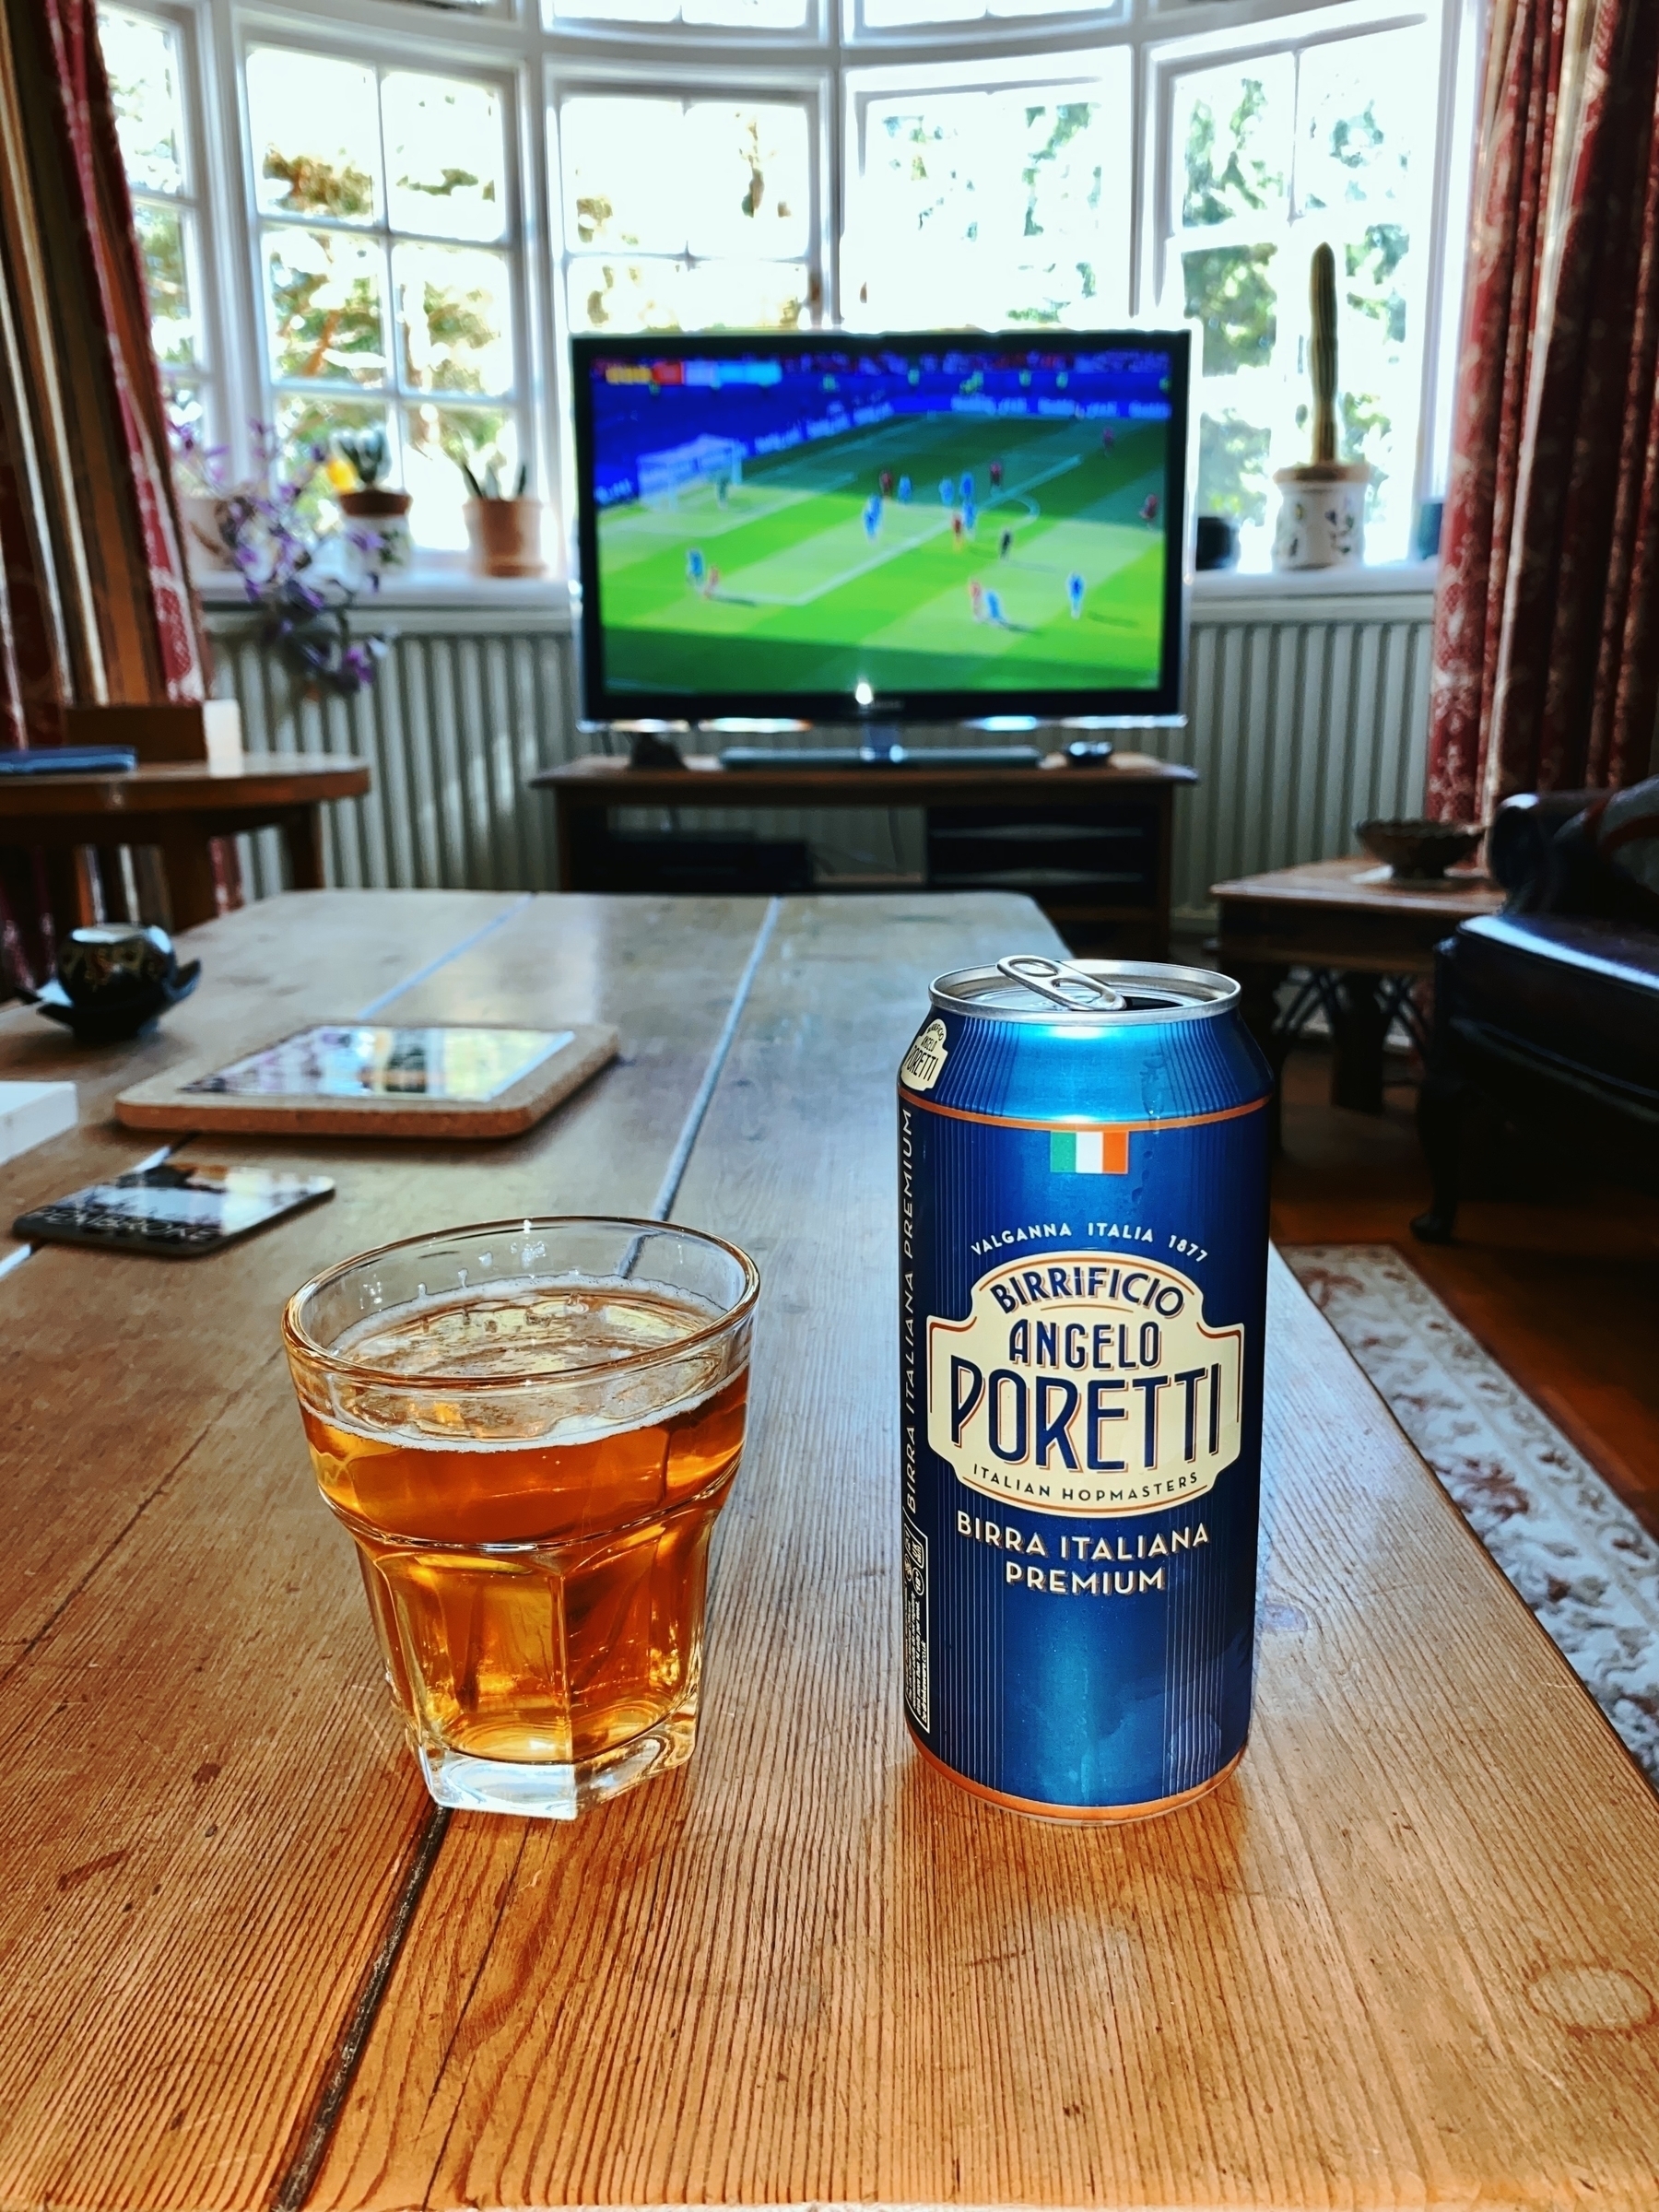 A glass of beer and a can of Birrificio Angelo Poretti sit on a wooden table in a living room with a soccer game on TV in the background.